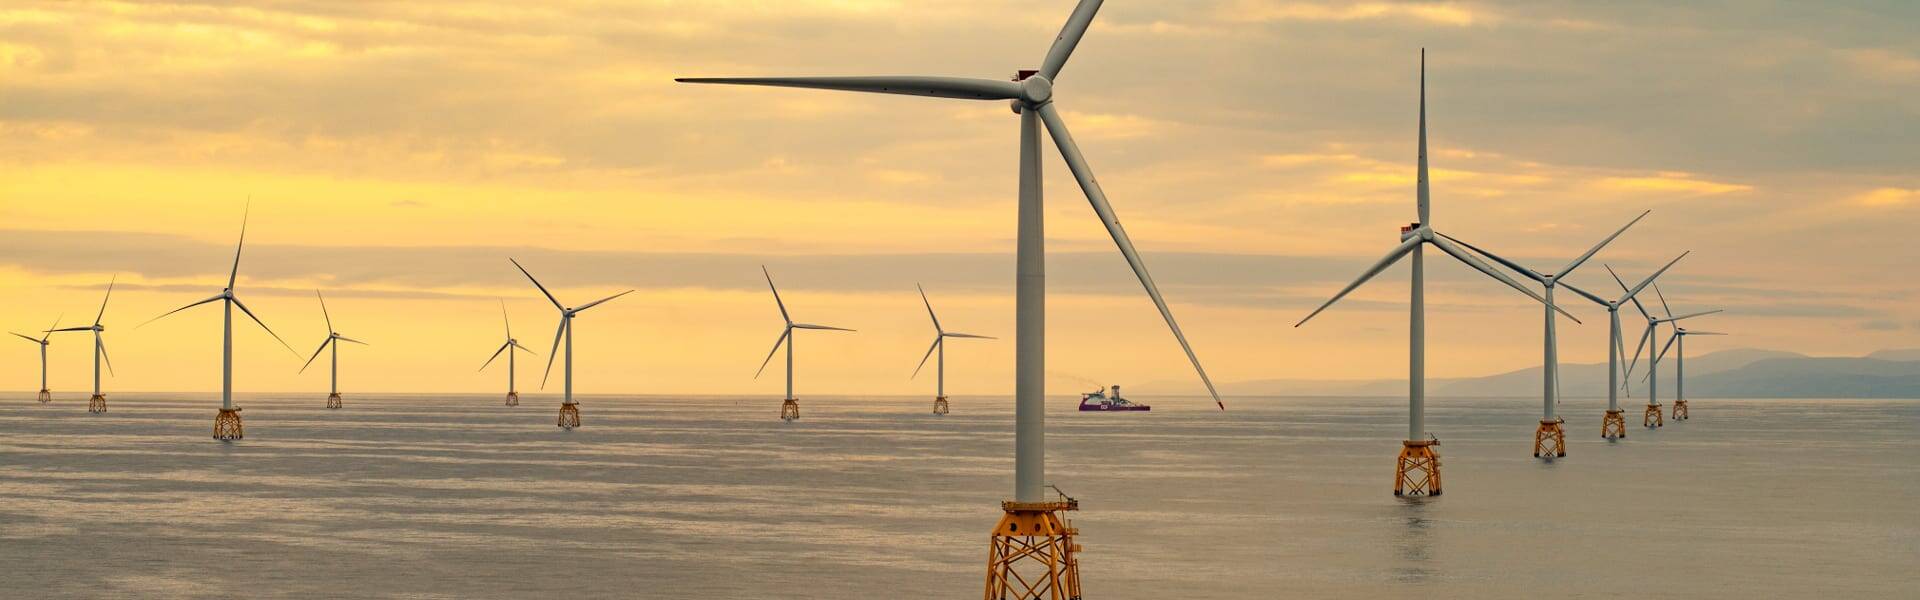 Ofgem and BEIS reveal next steps in offshore transmission review